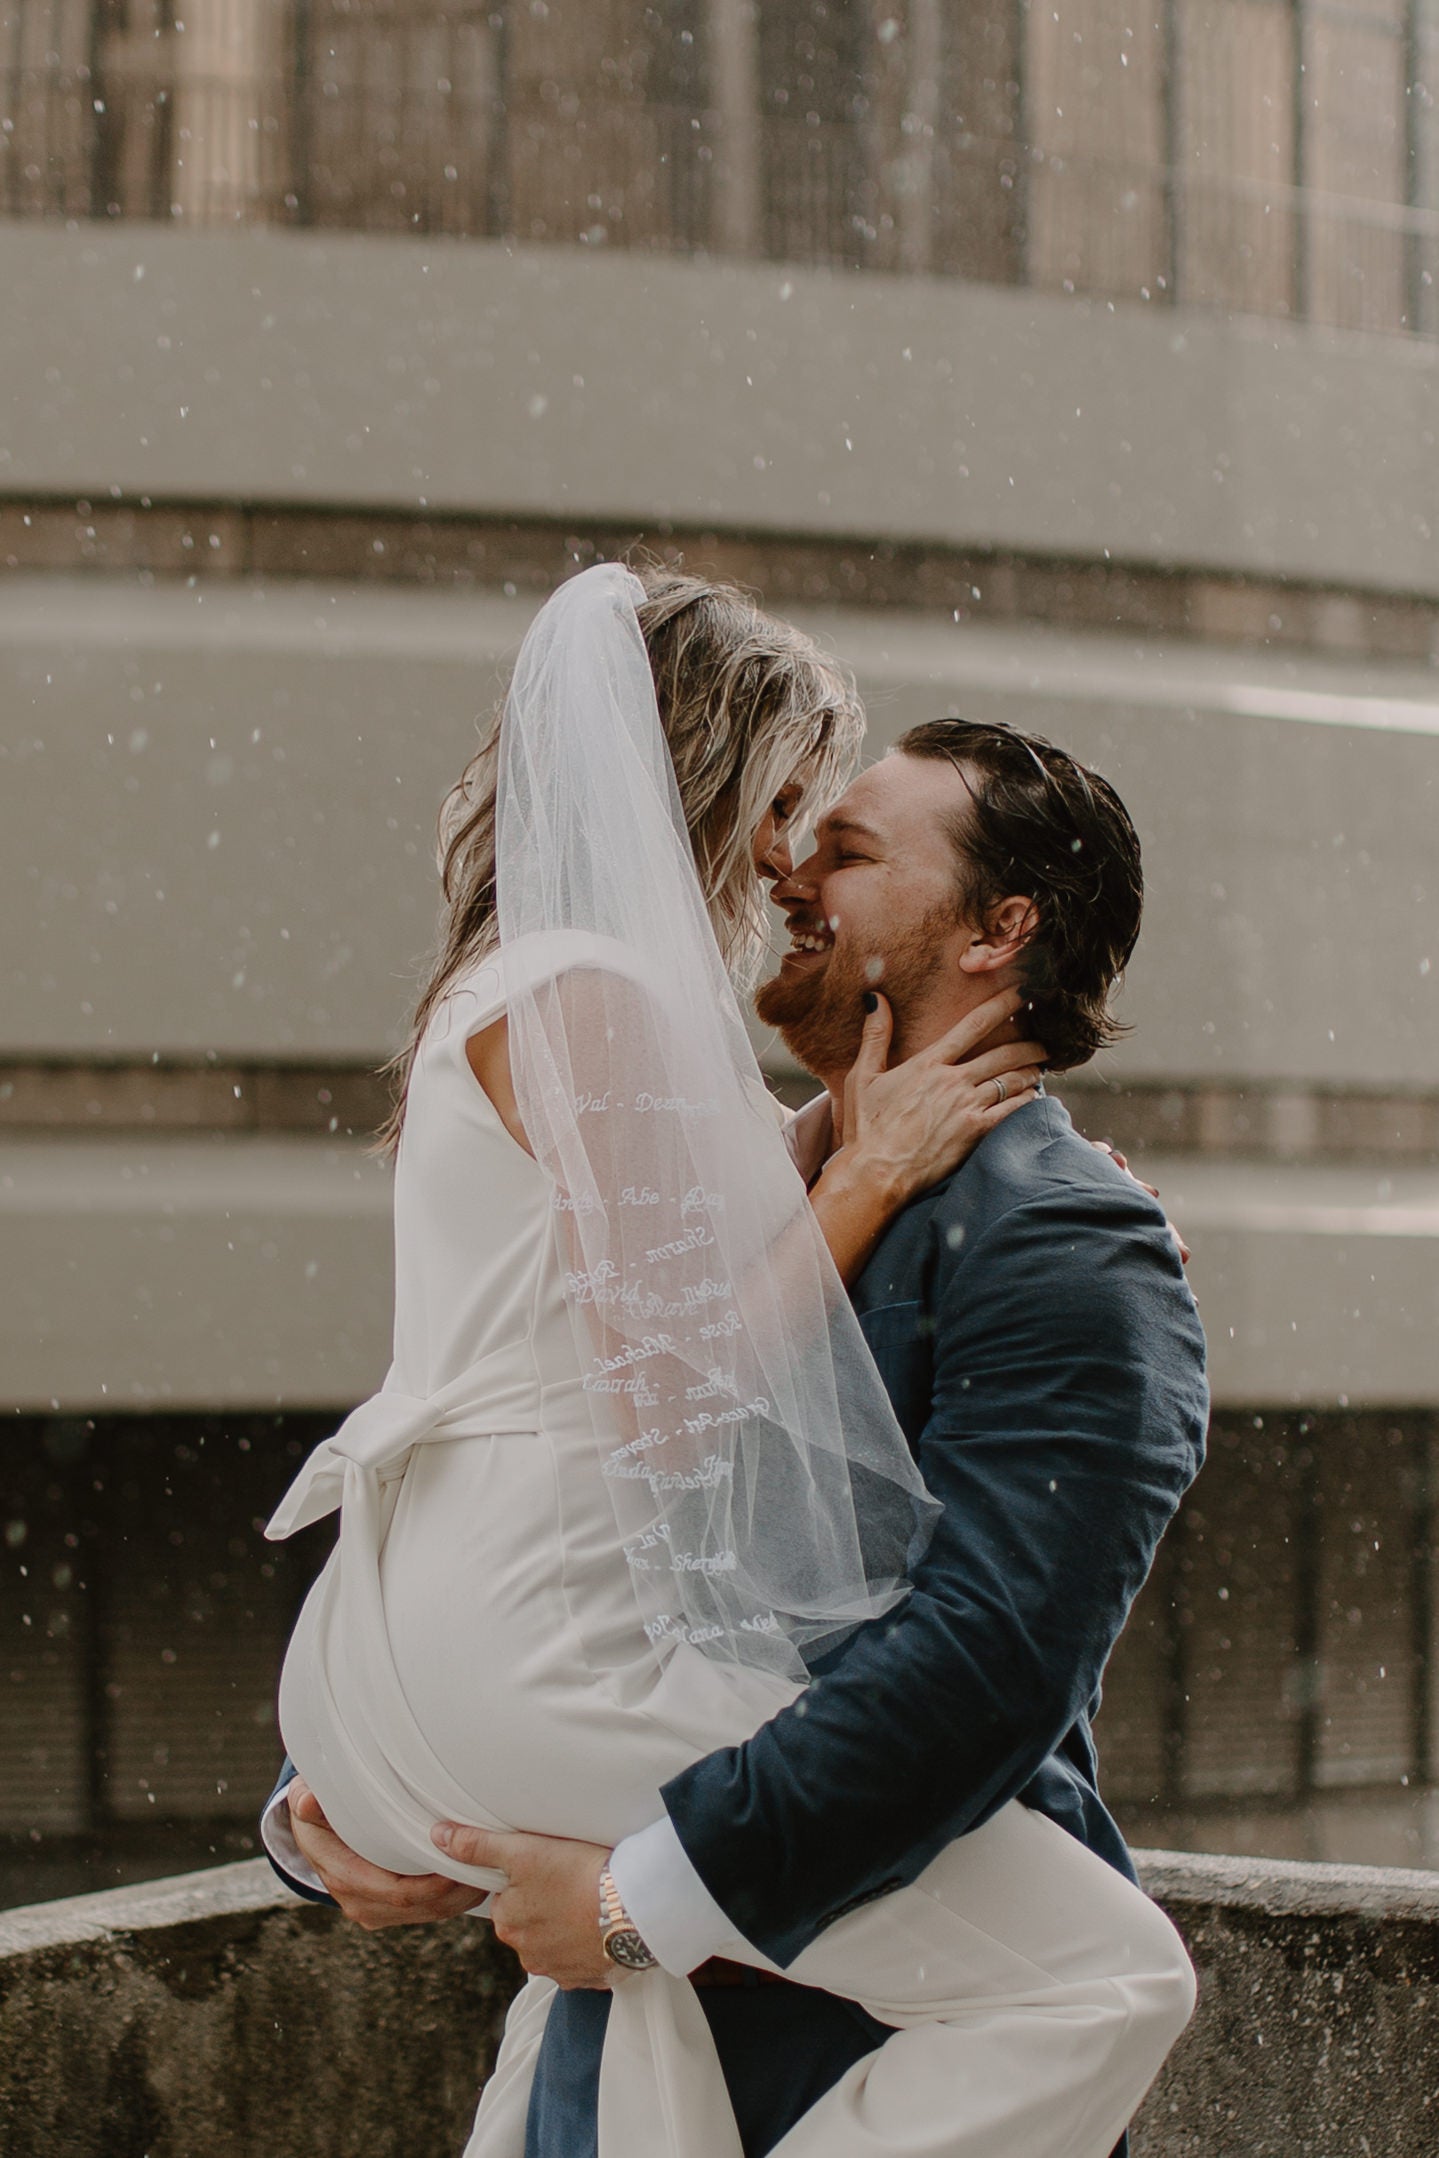 simple mid length bridal veil with bespoke script writing as couple embraces in the rain